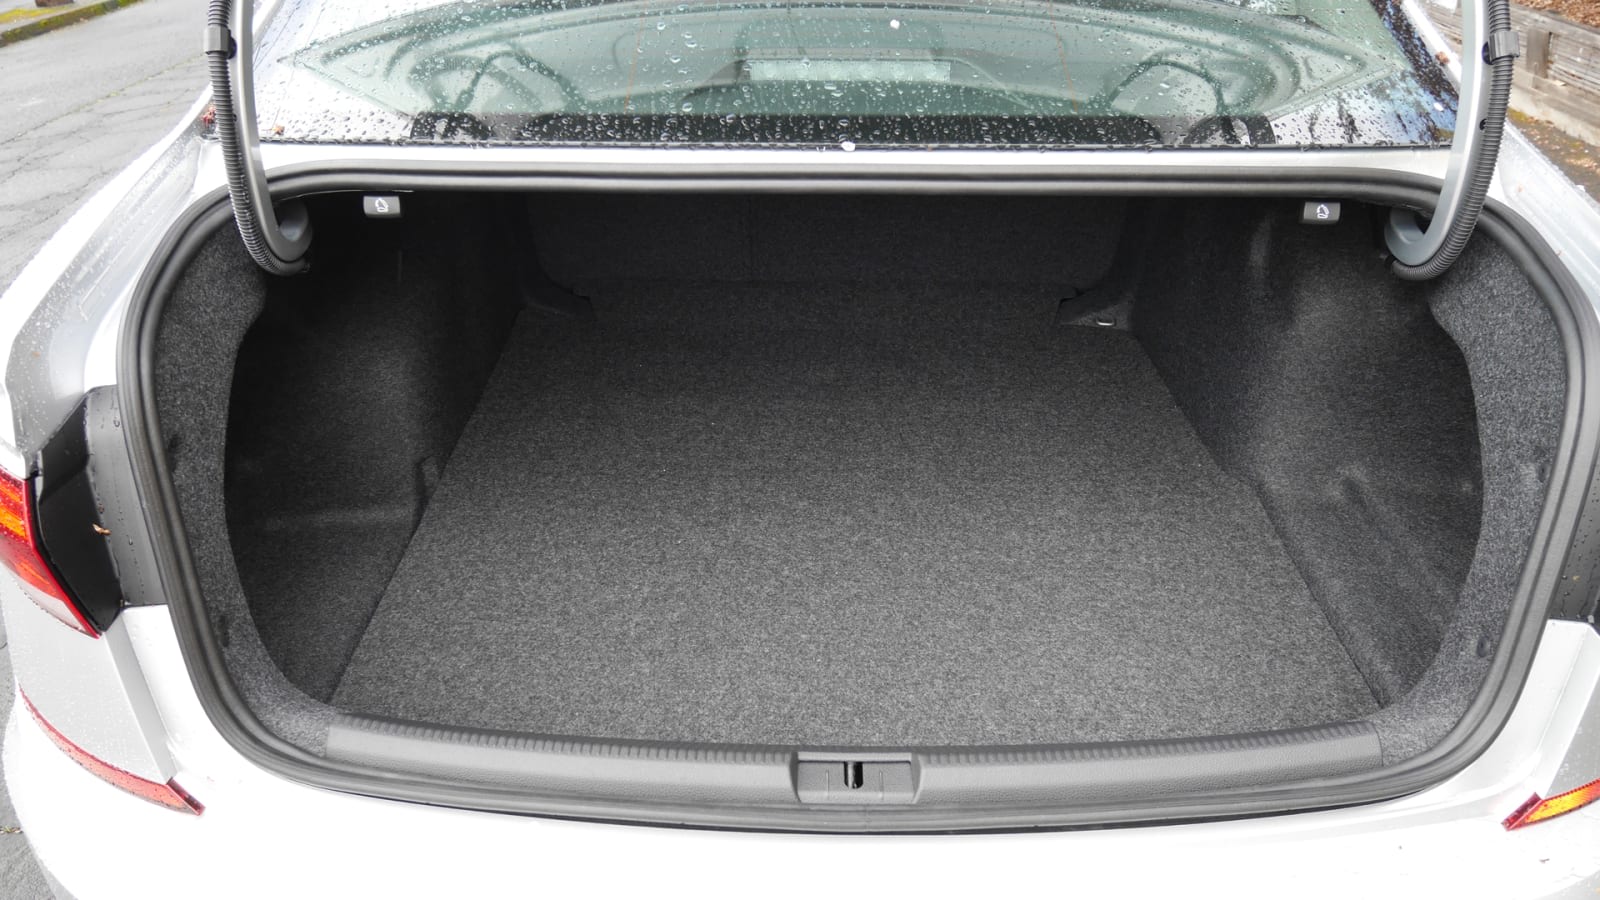 end point compliance Shift 2020 VW Passat Luggage Test | How big is the trunk? - Autoblog